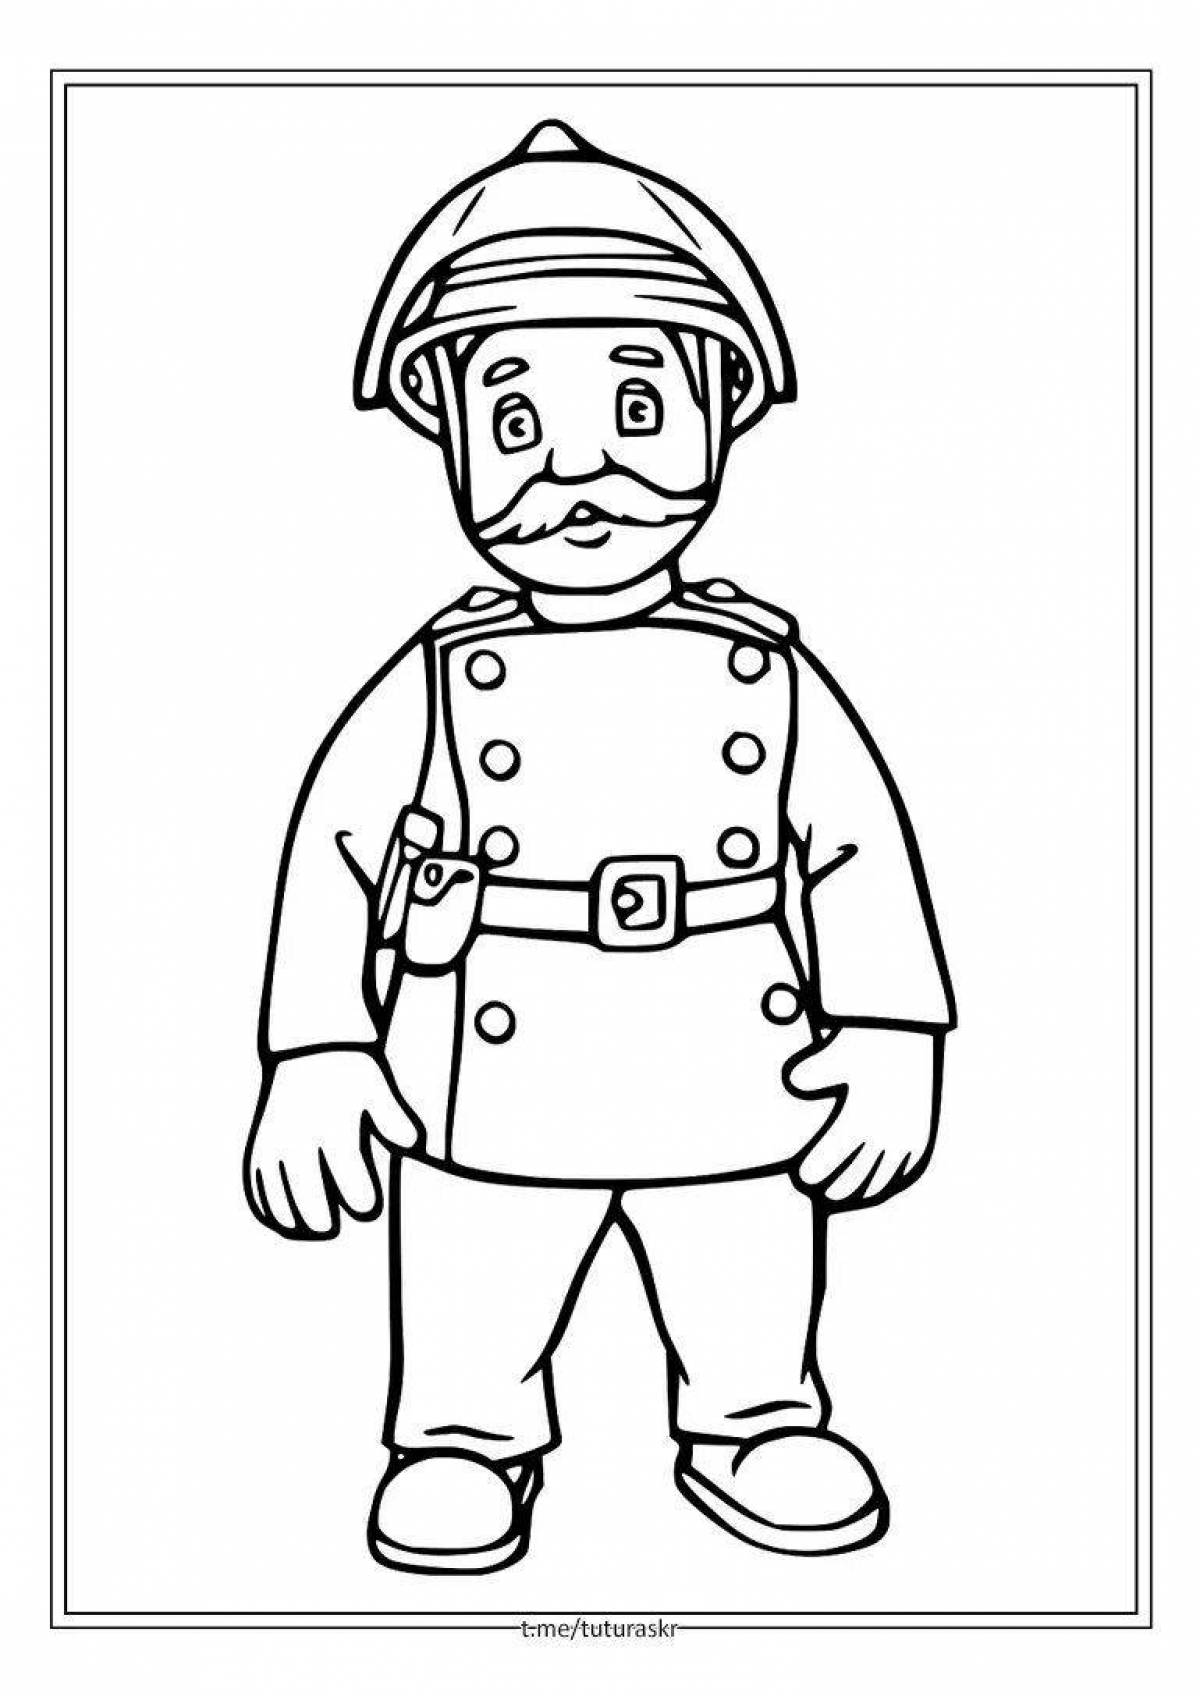 Charming officer coloring page